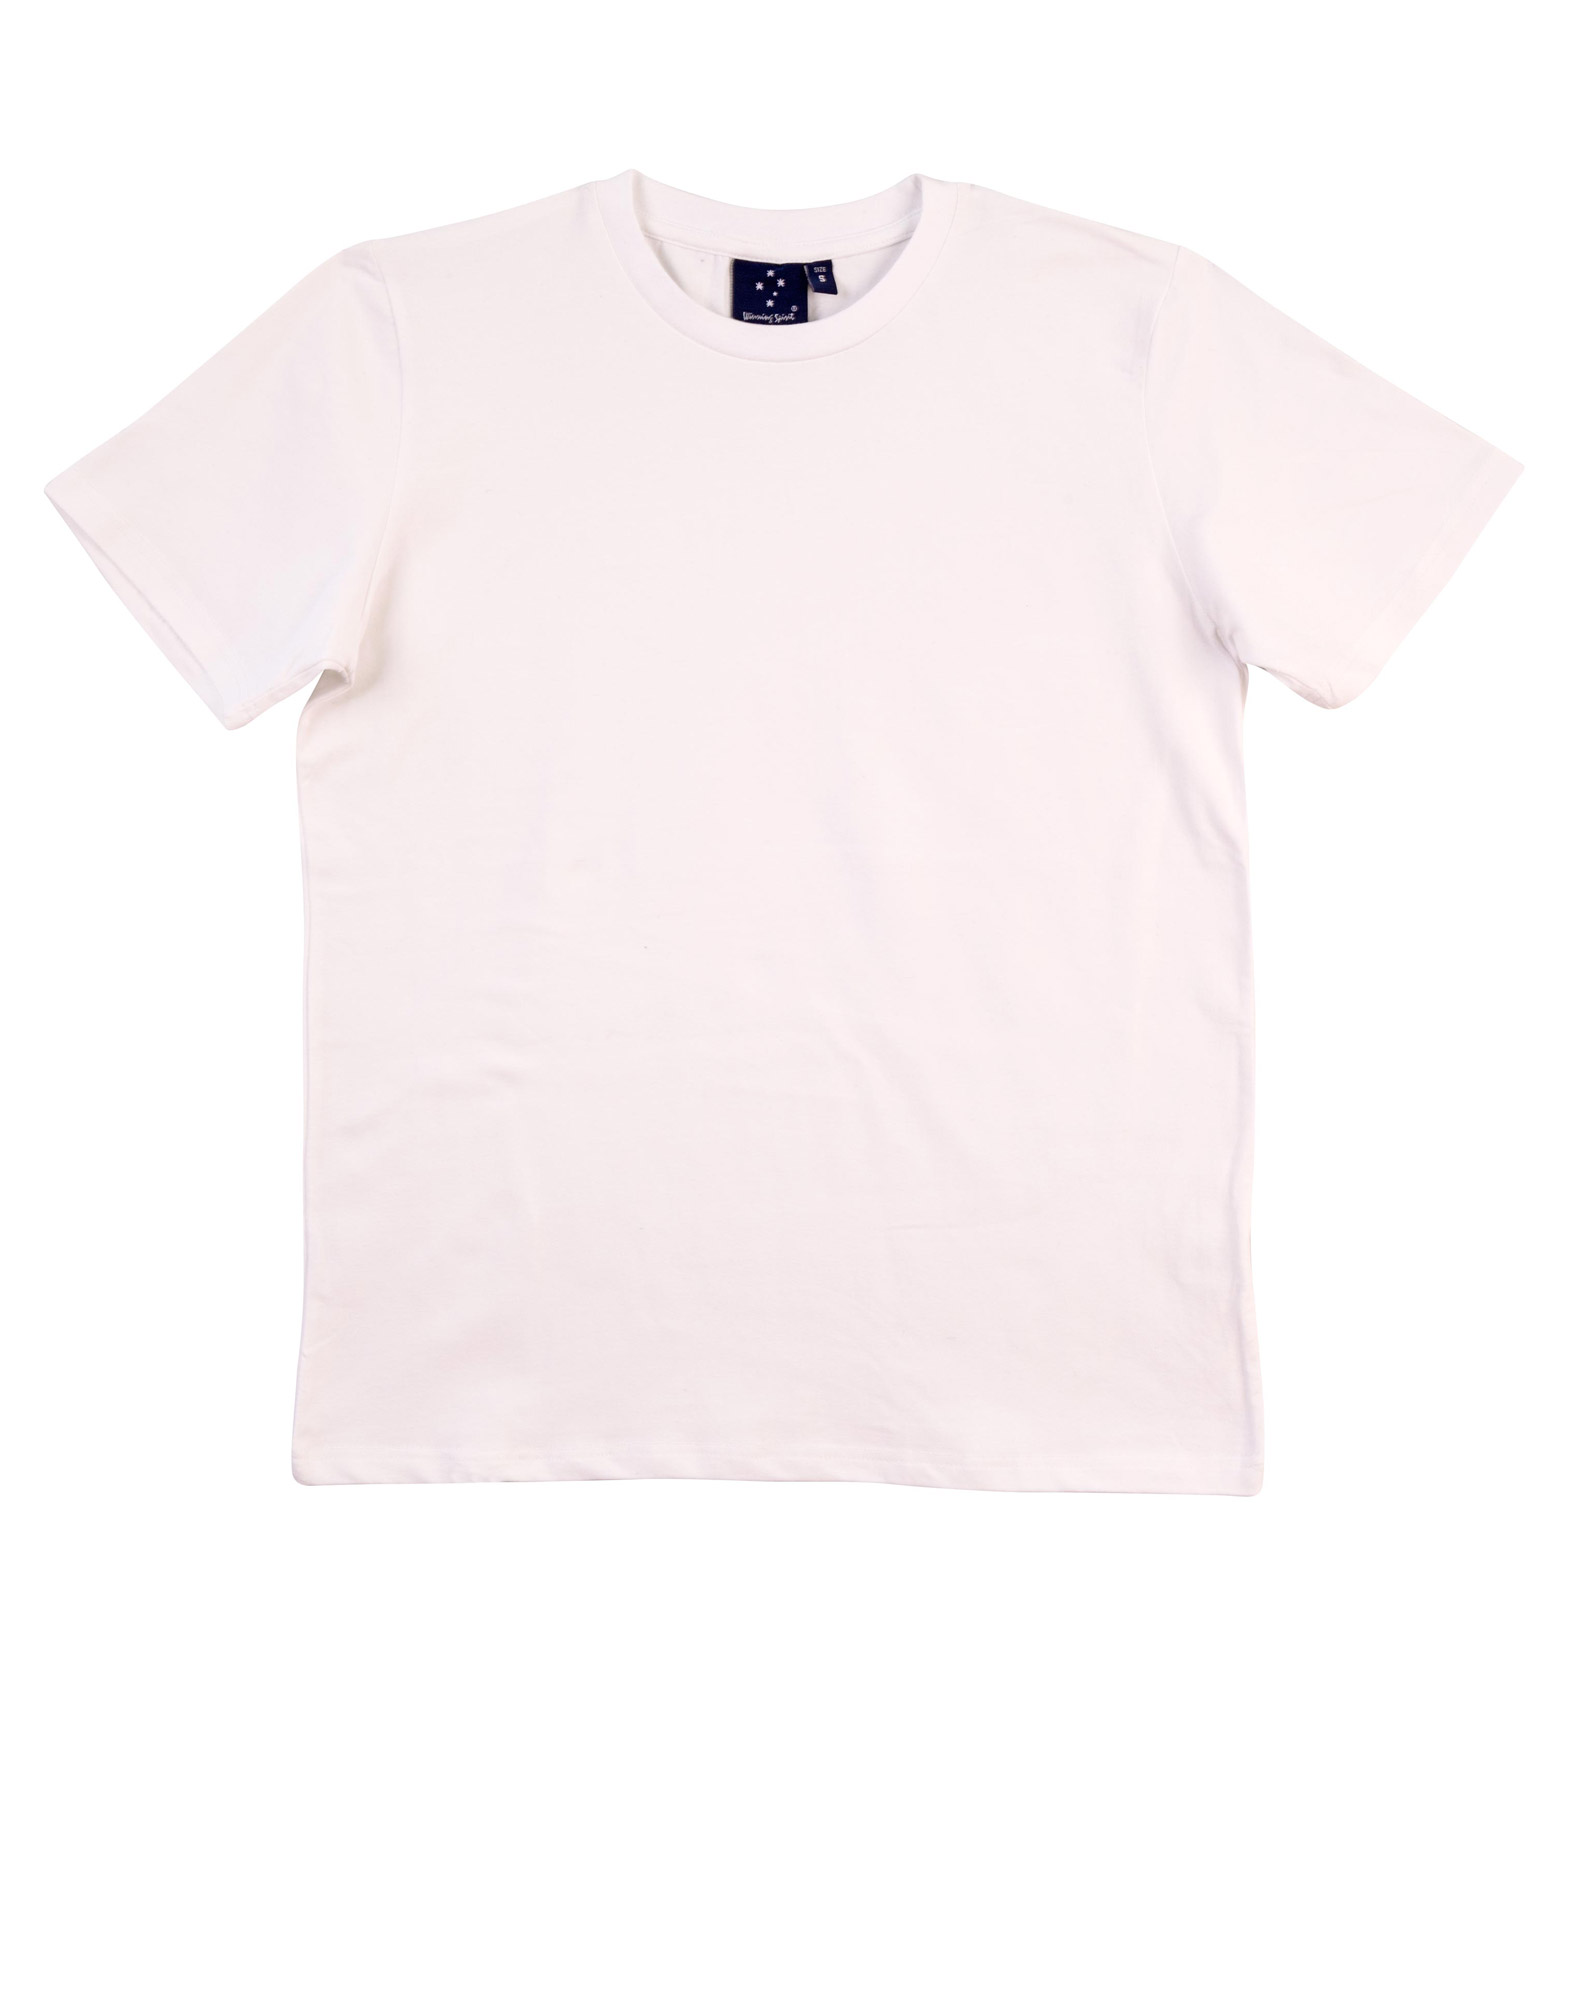 Custom (White) Mens Super Fitted Cotton Tee Shirts Online in Australia